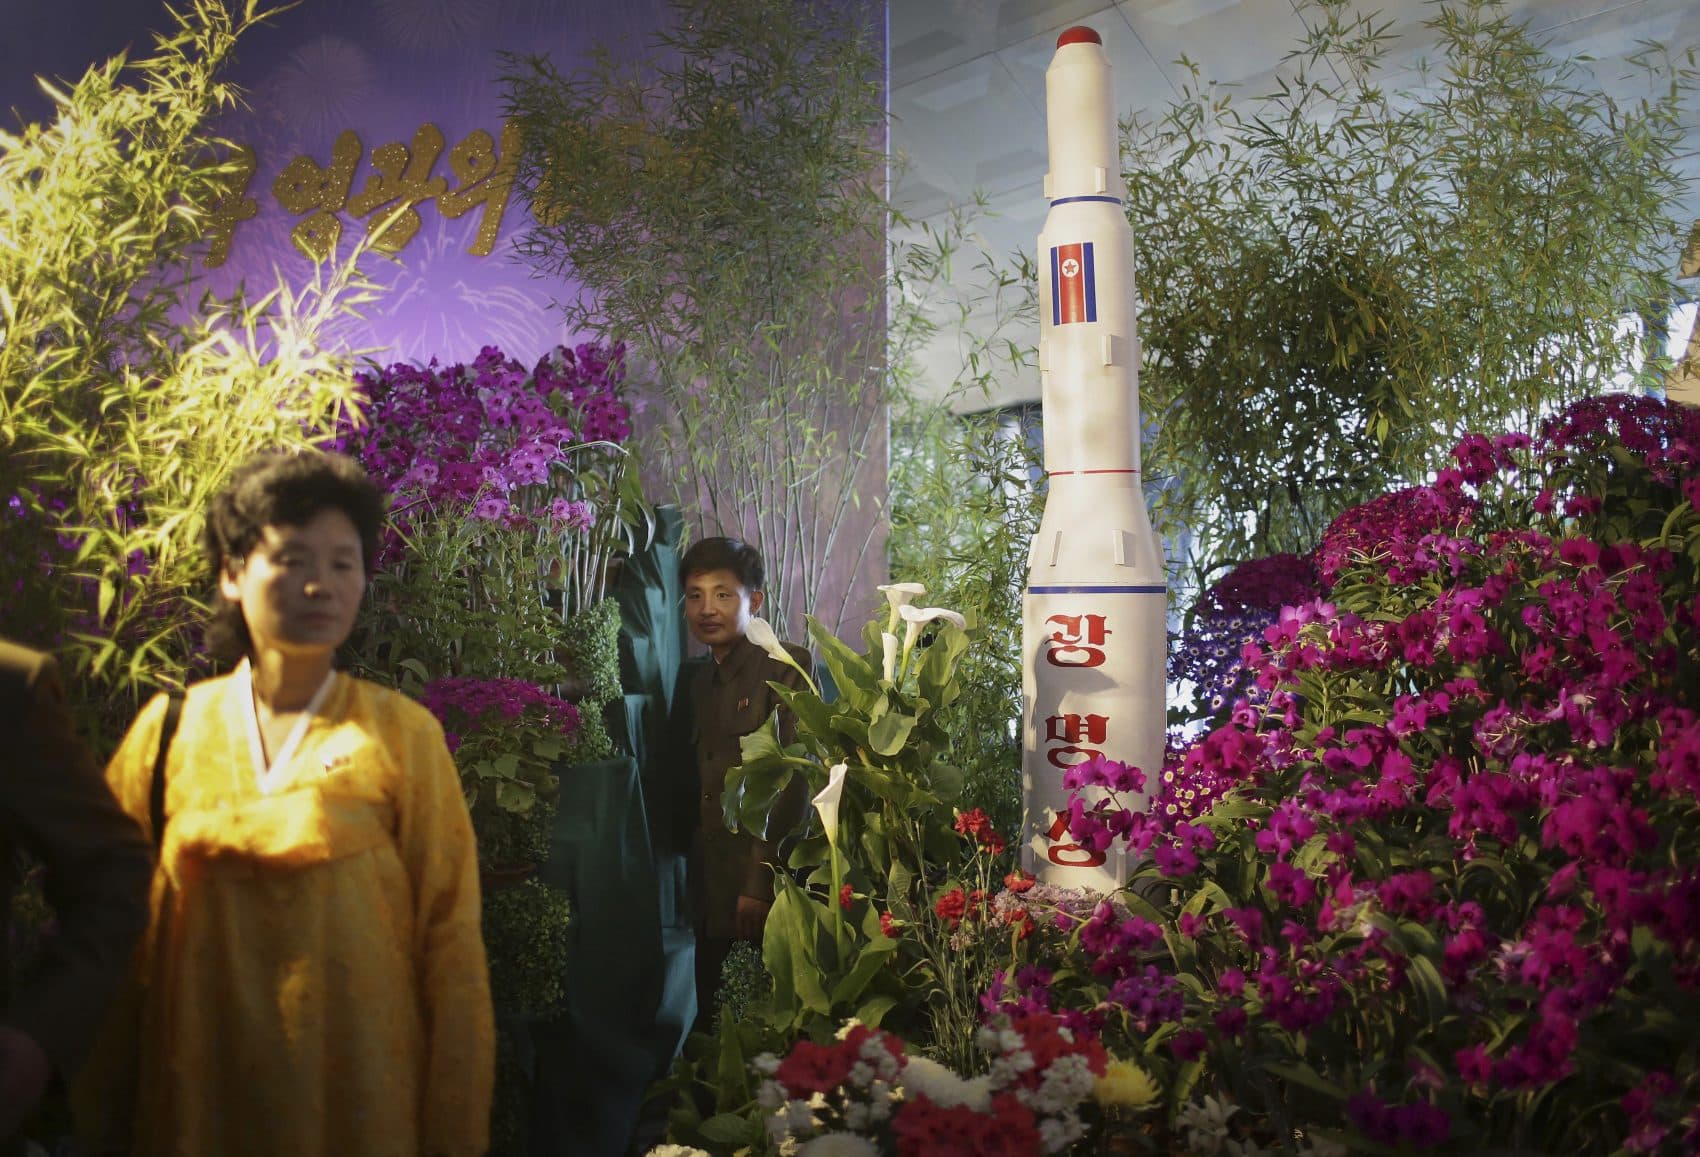 North Koreans walk past a model of a rocket at a flower festival as part of celebrations to mark the 105th birth anniversary of late leader Kim Il Sung on Sunday, April 16, 2017, in Pyongyang, North Korea. A North Korean missile exploded during launch Sunday, U.S. and South Korean officials said, a high-profile failure that comes as a powerful U.S. aircraft supercarrier approaches the Korean Peninsula in a show of force. (Wong Maye-E/AP)